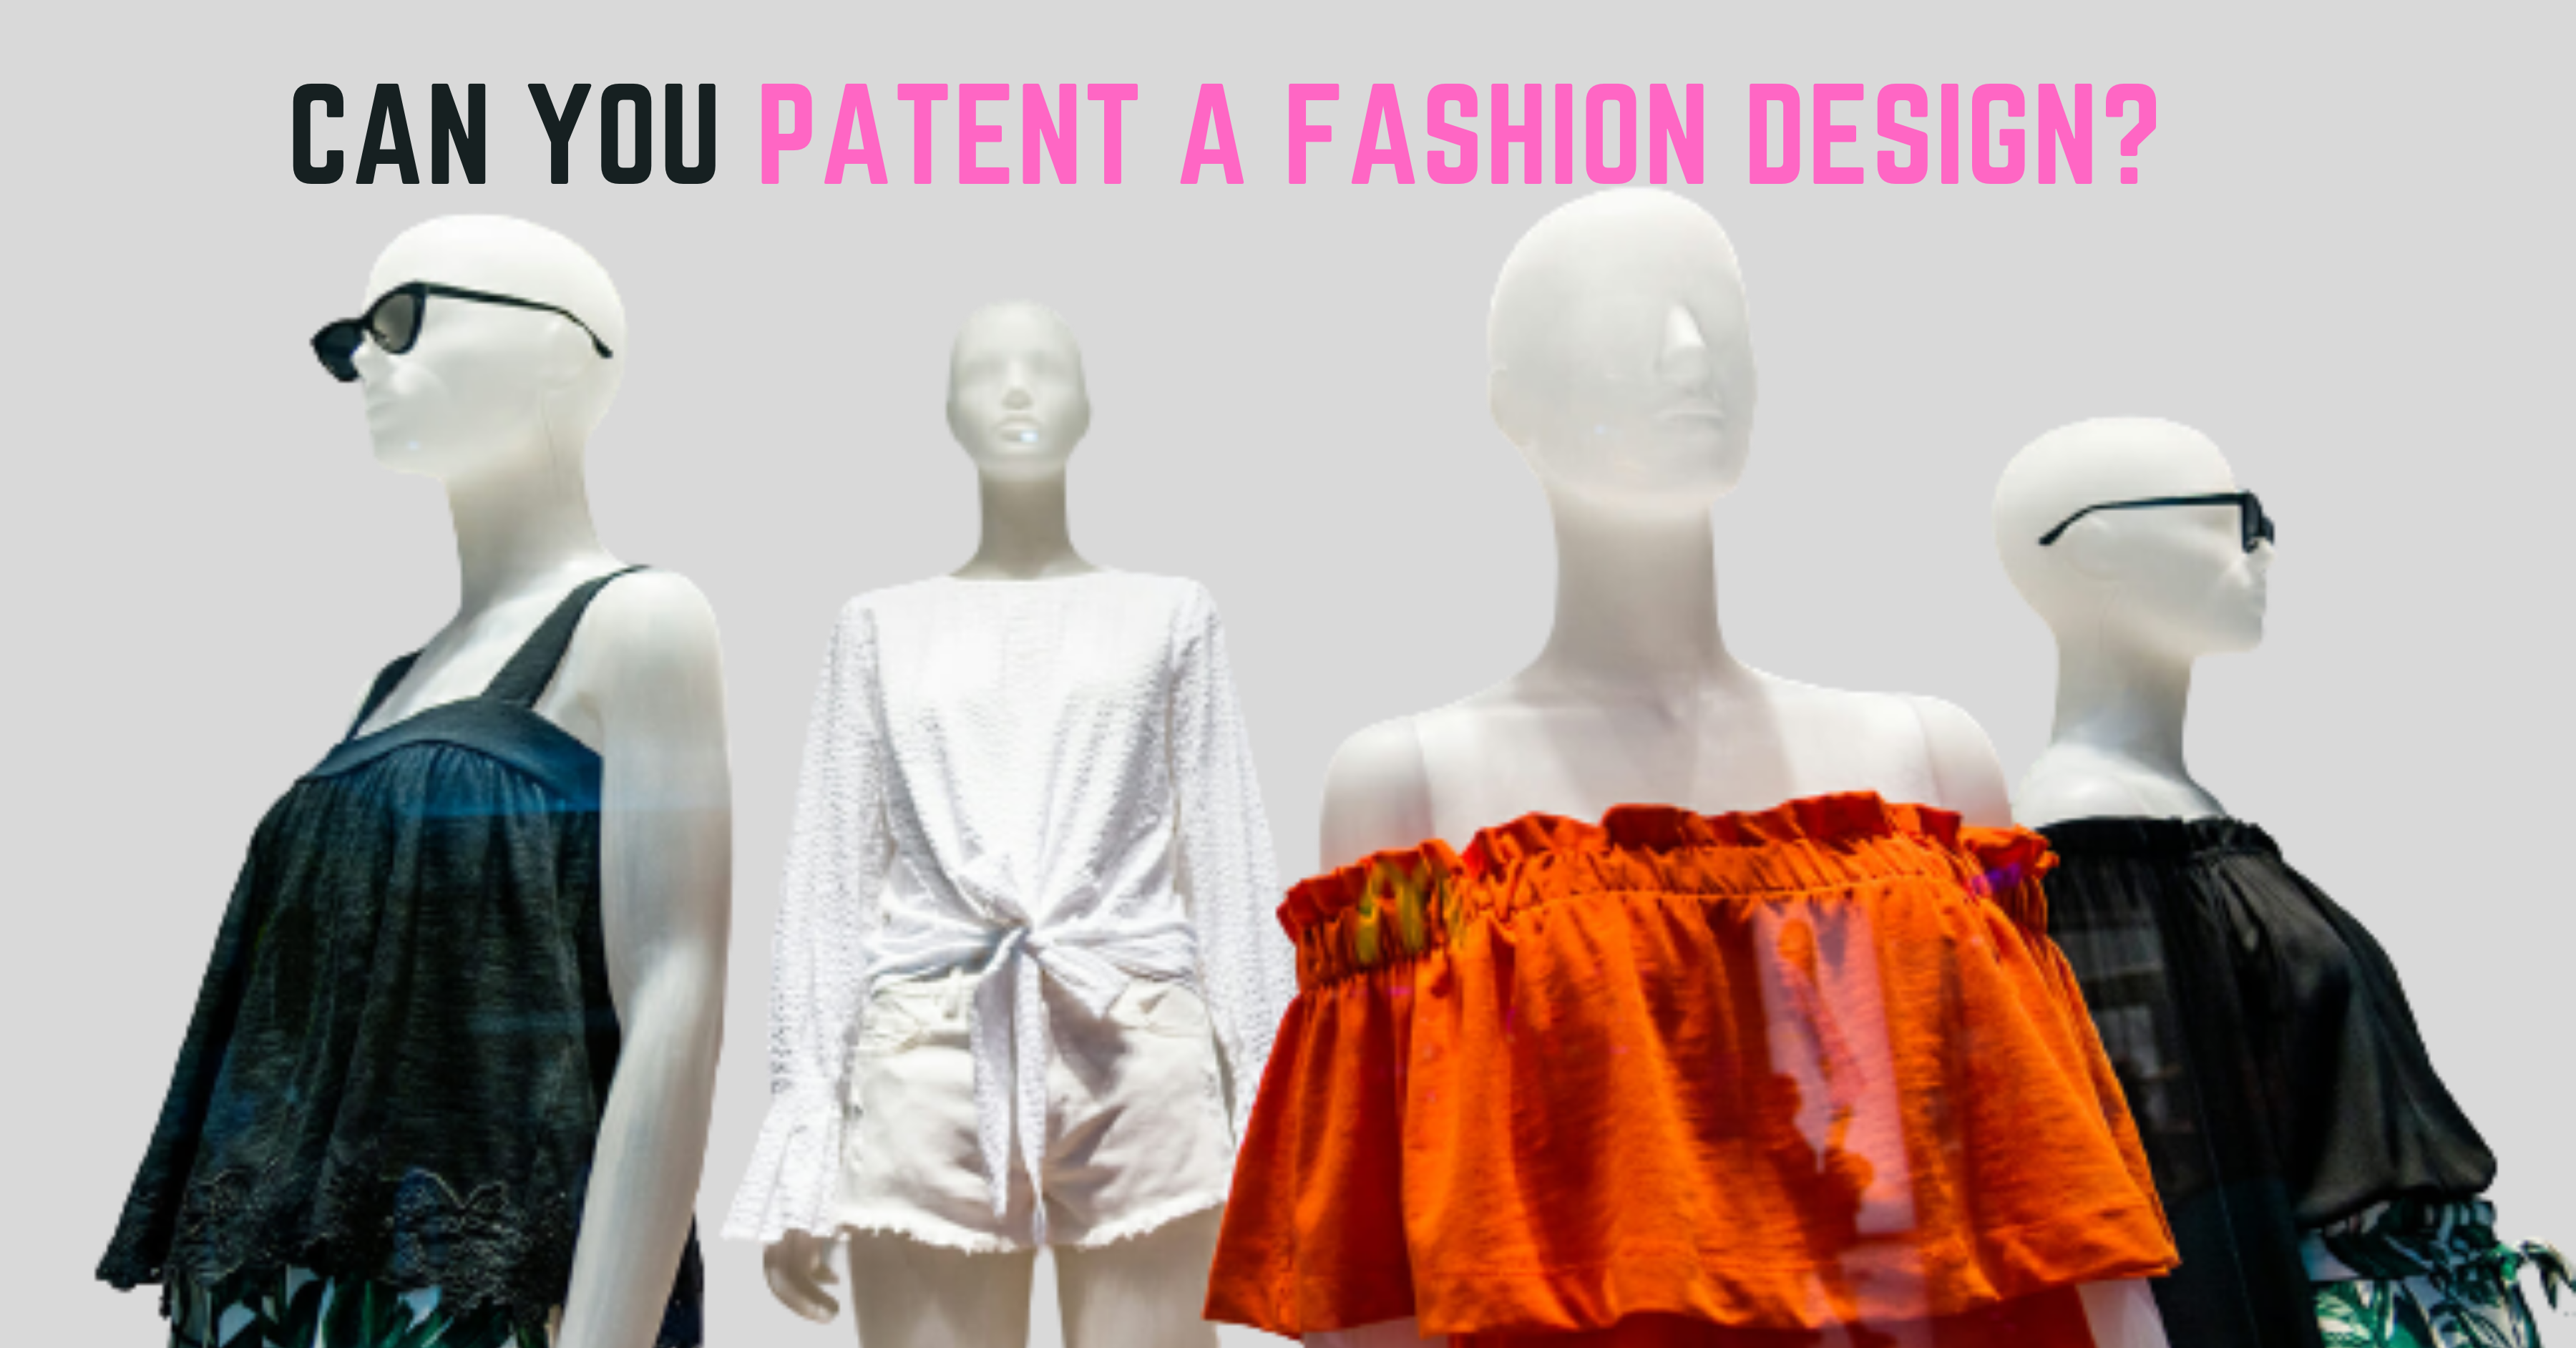 Can You Patent a Fashion Design?